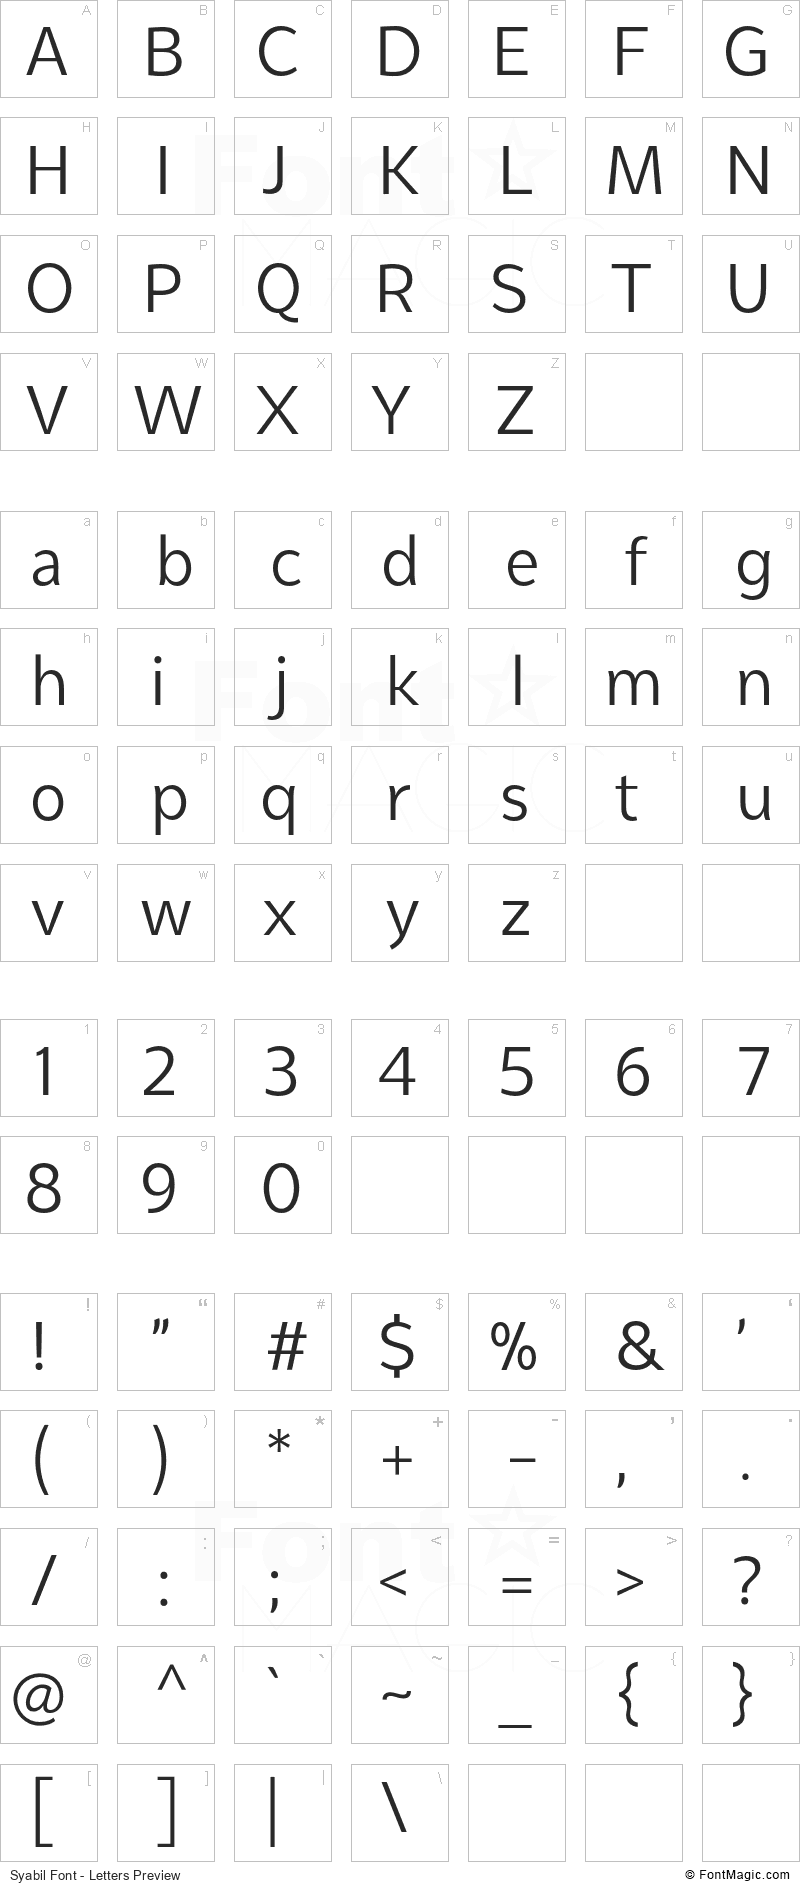 Syabil Font - All Latters Preview Chart